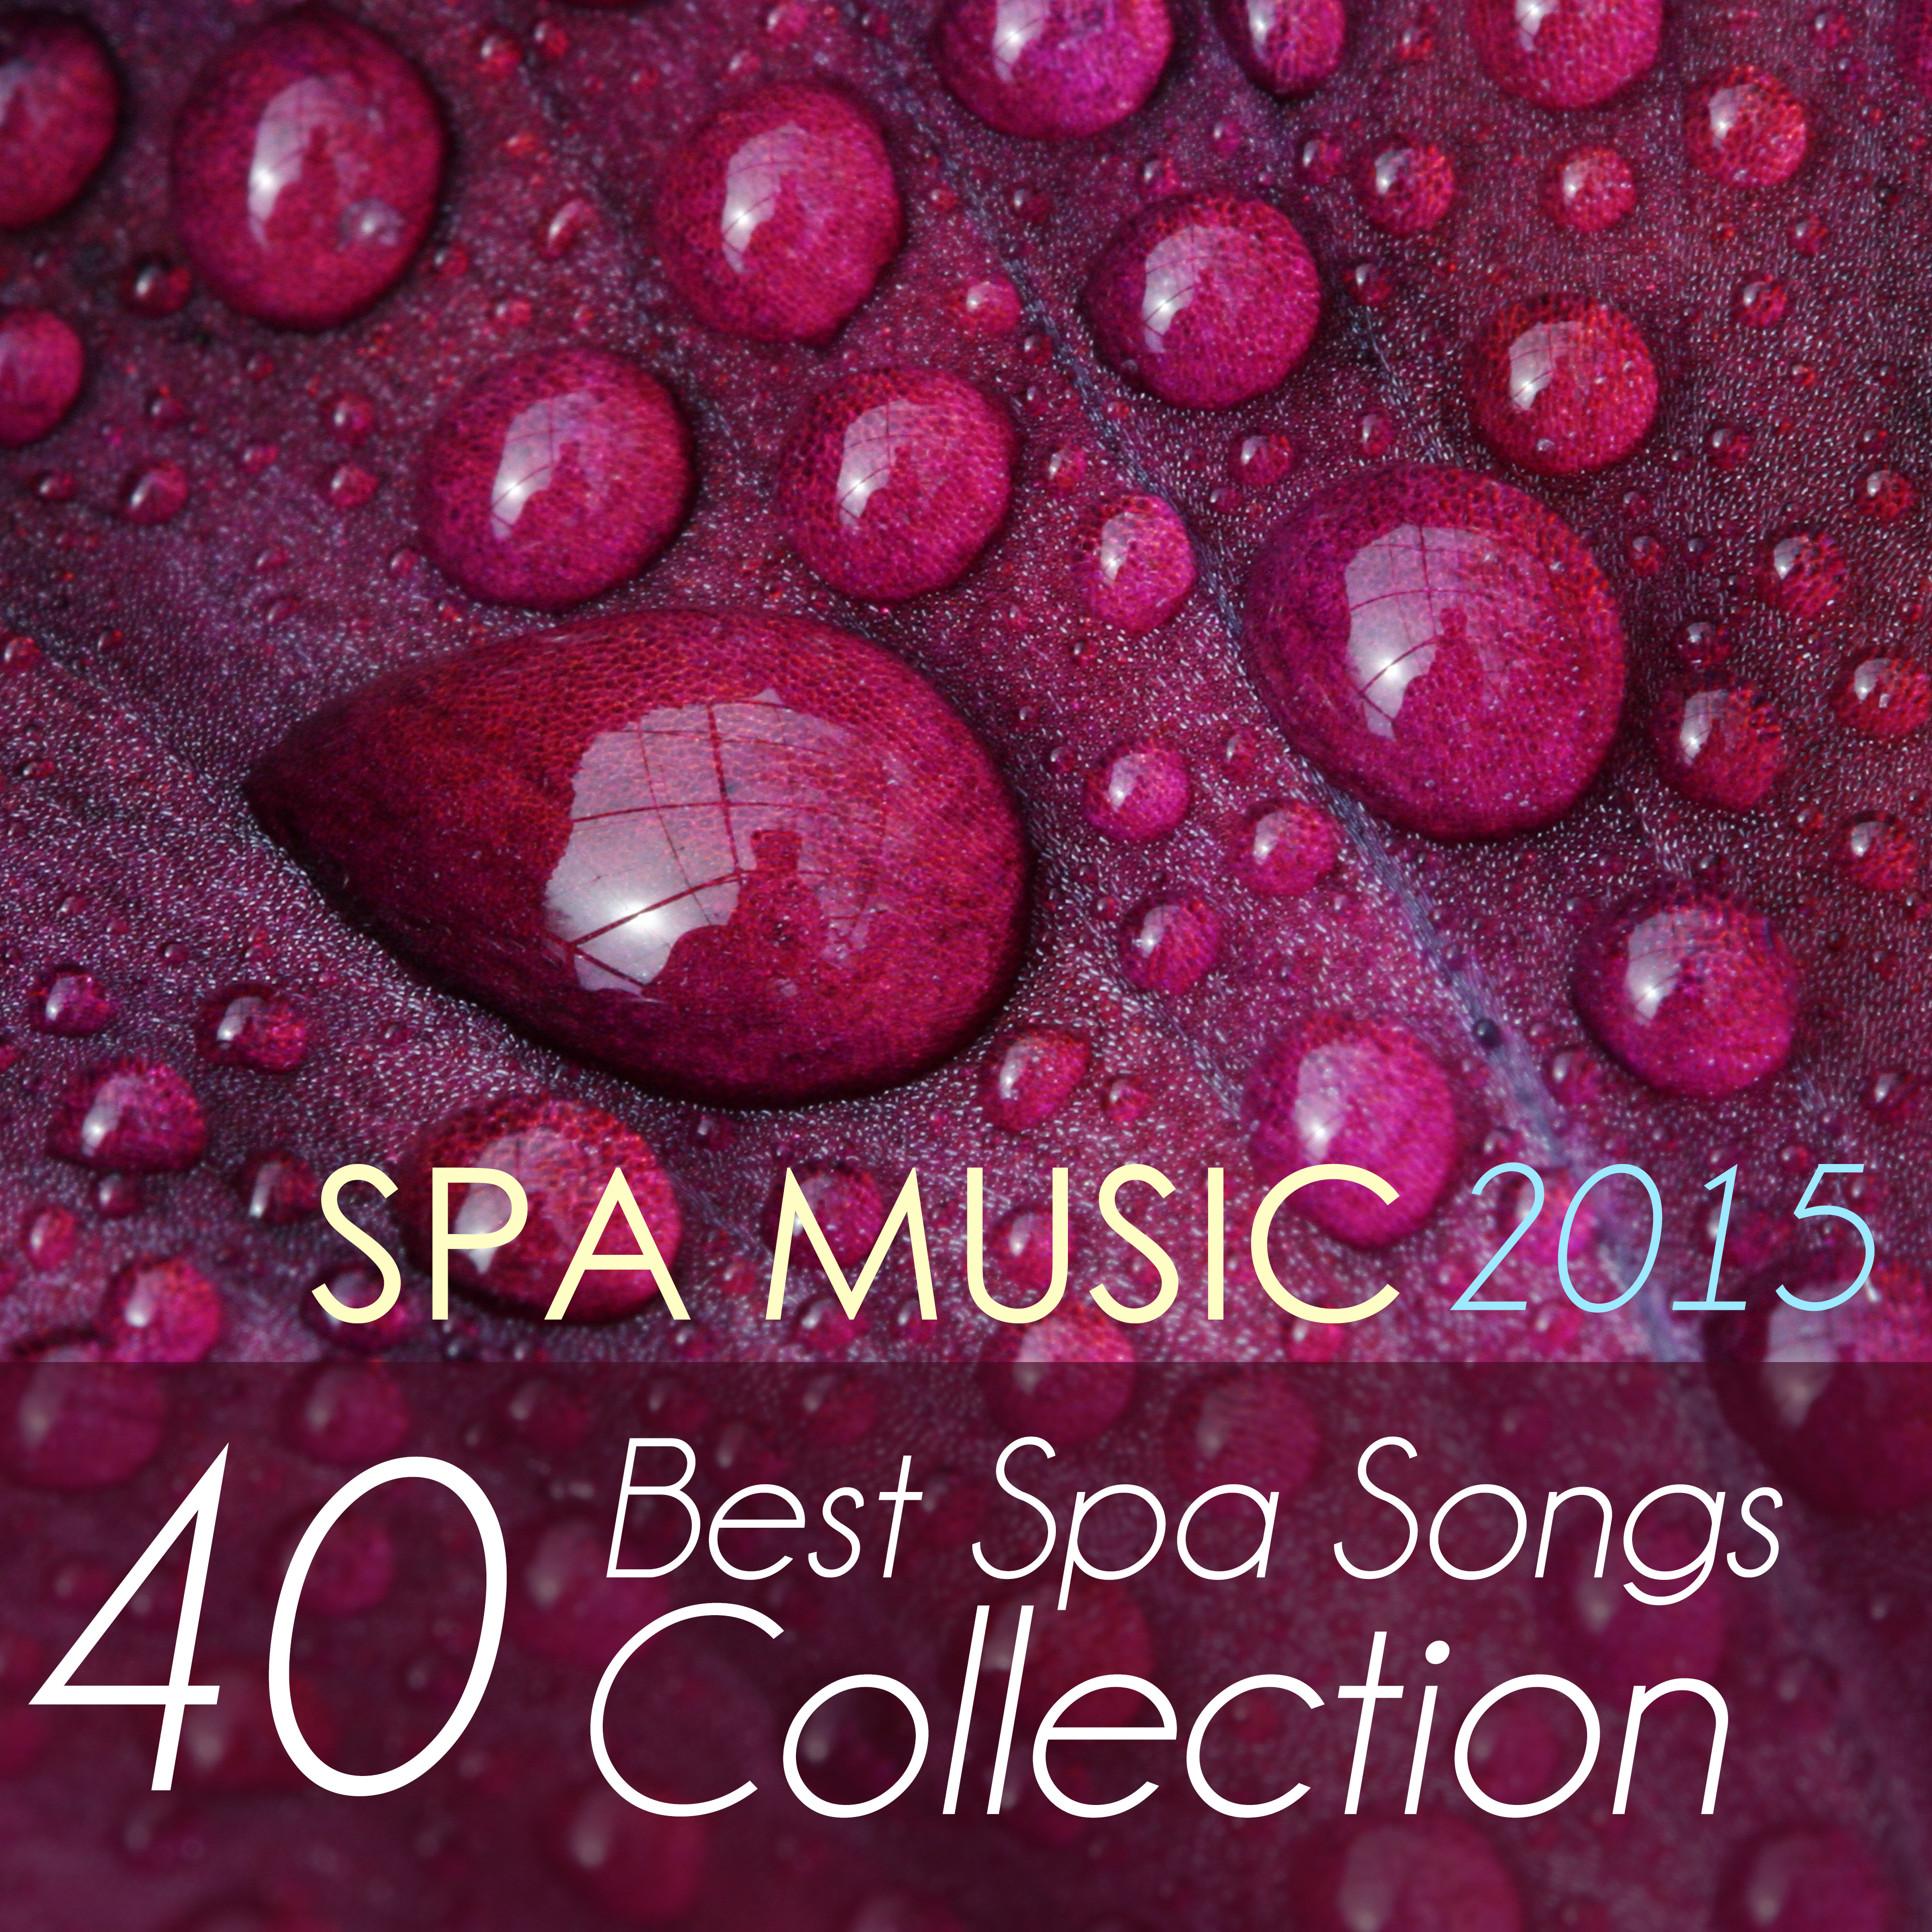 Spa Music 2015: The 40 Best Spa Songs Collection